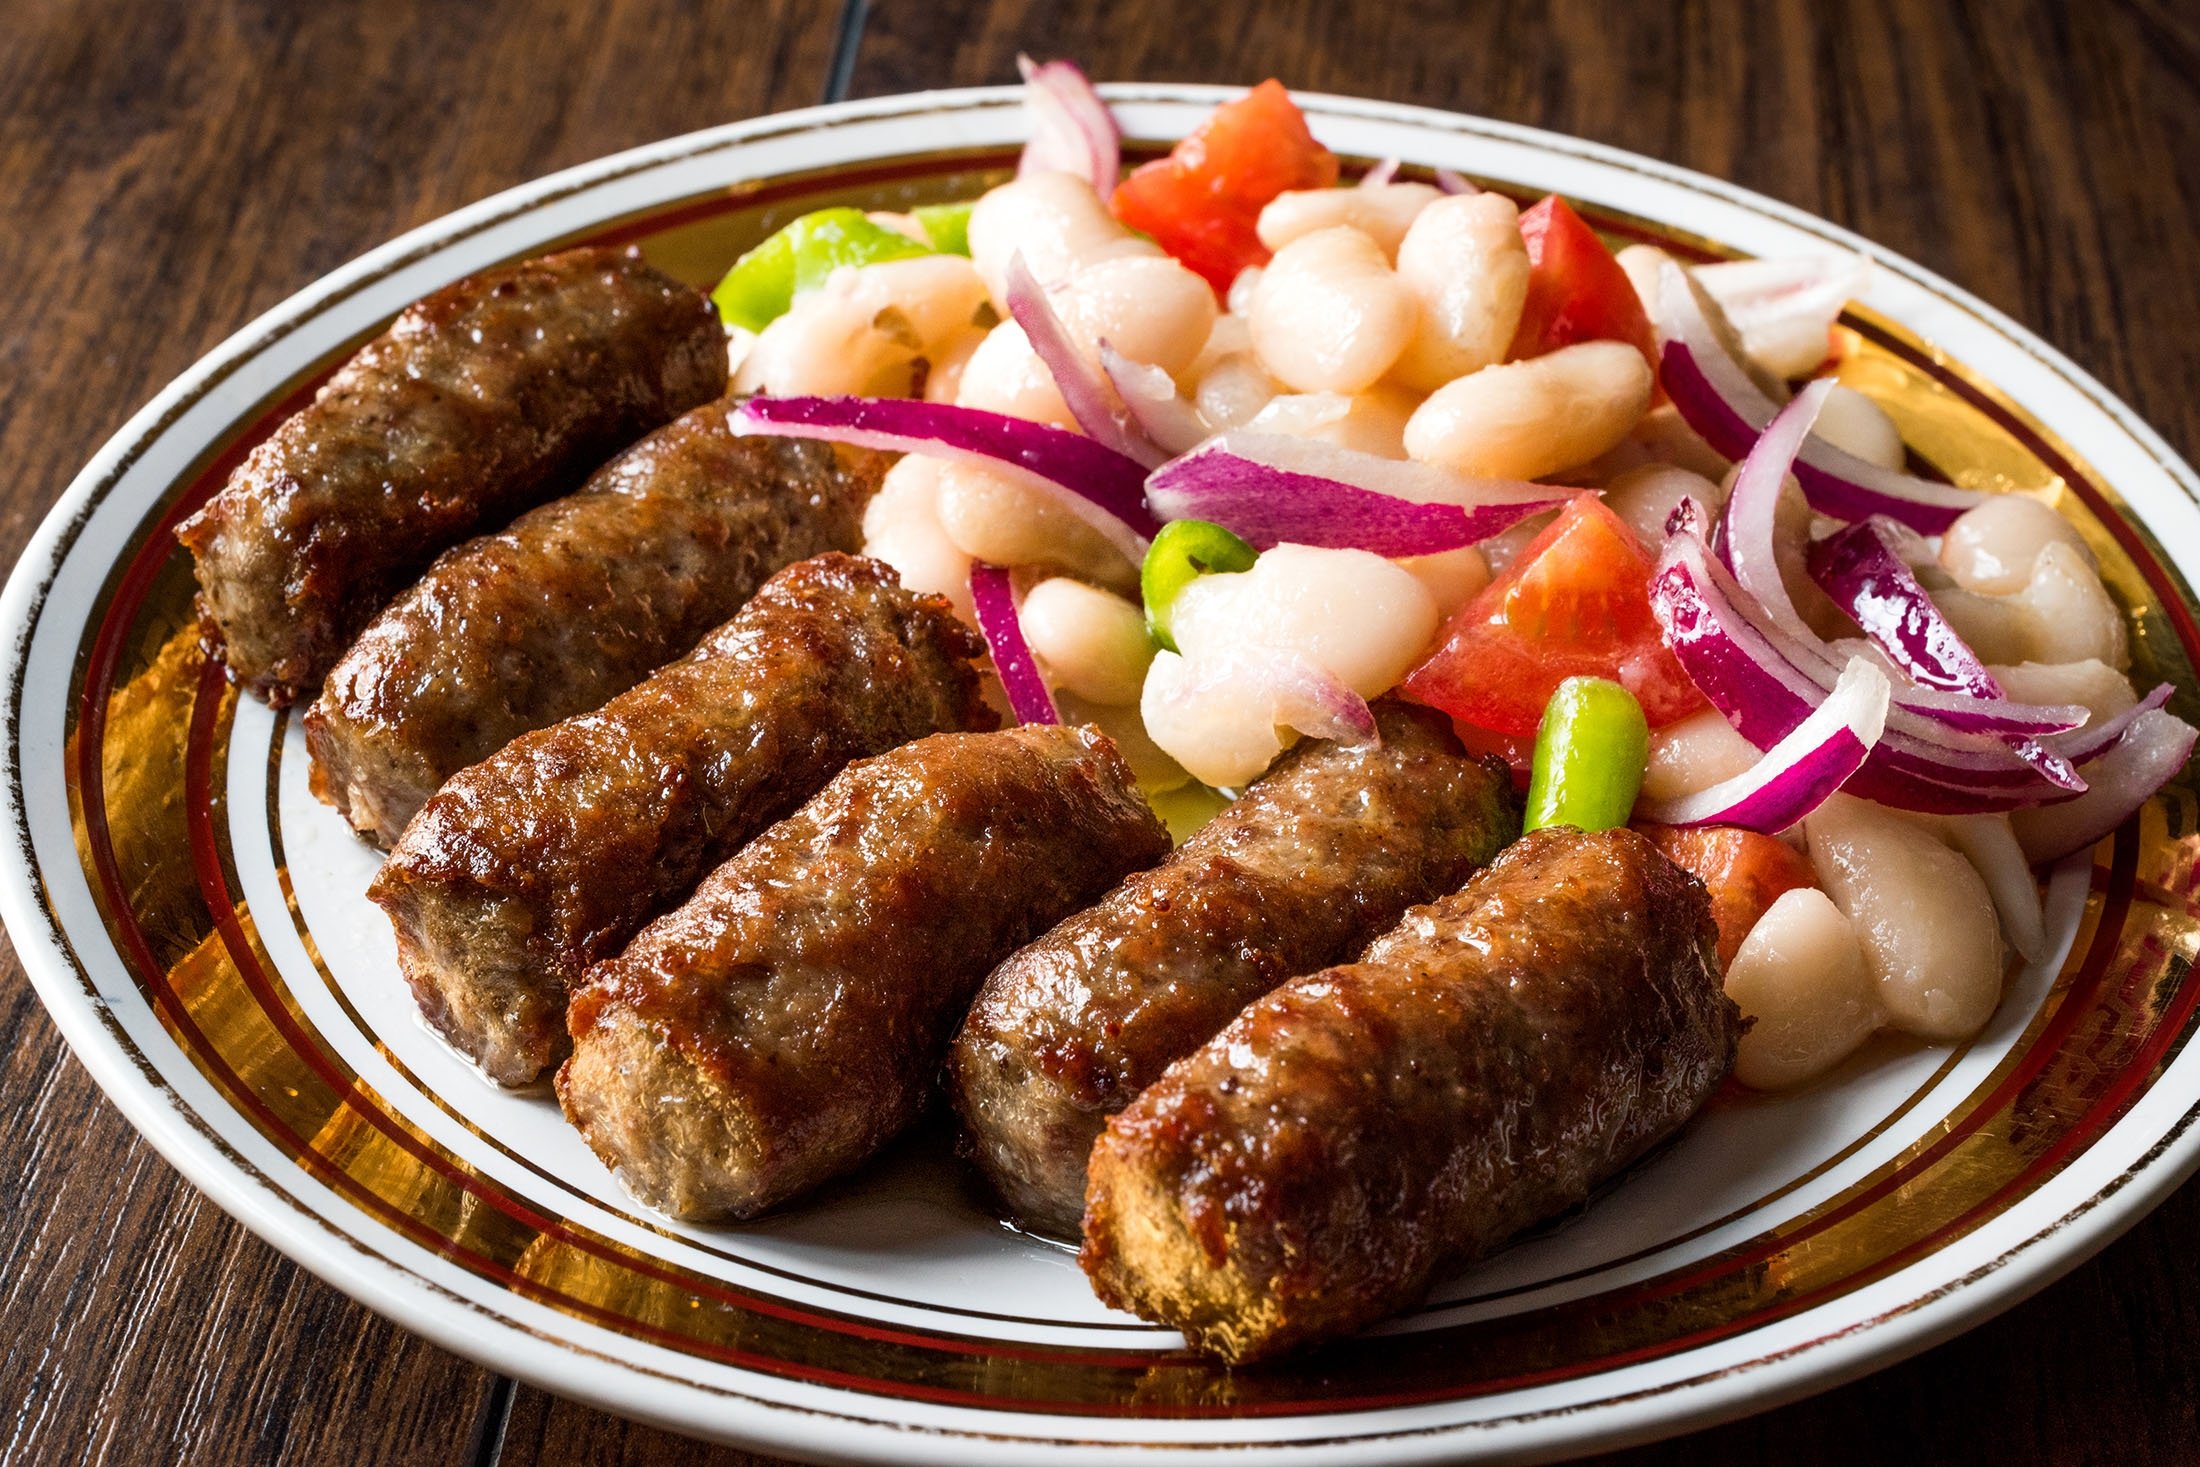 Inegöl köfte and piyaz is a delicious and filling dinner. (Shutterstock Photo)